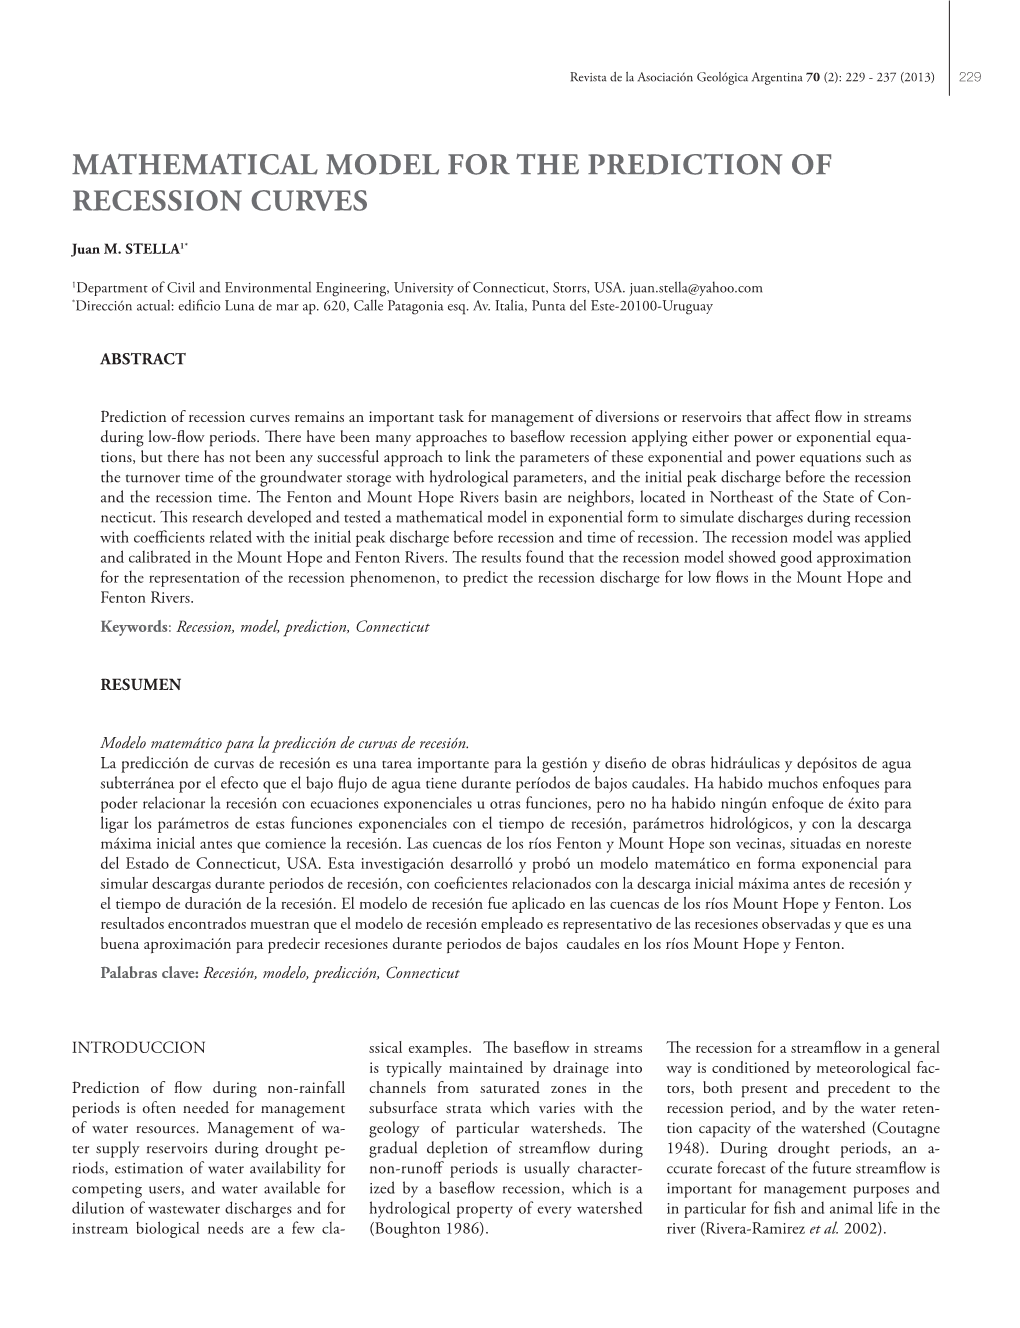 Mathematical Model for the Prediction of Recession Curves